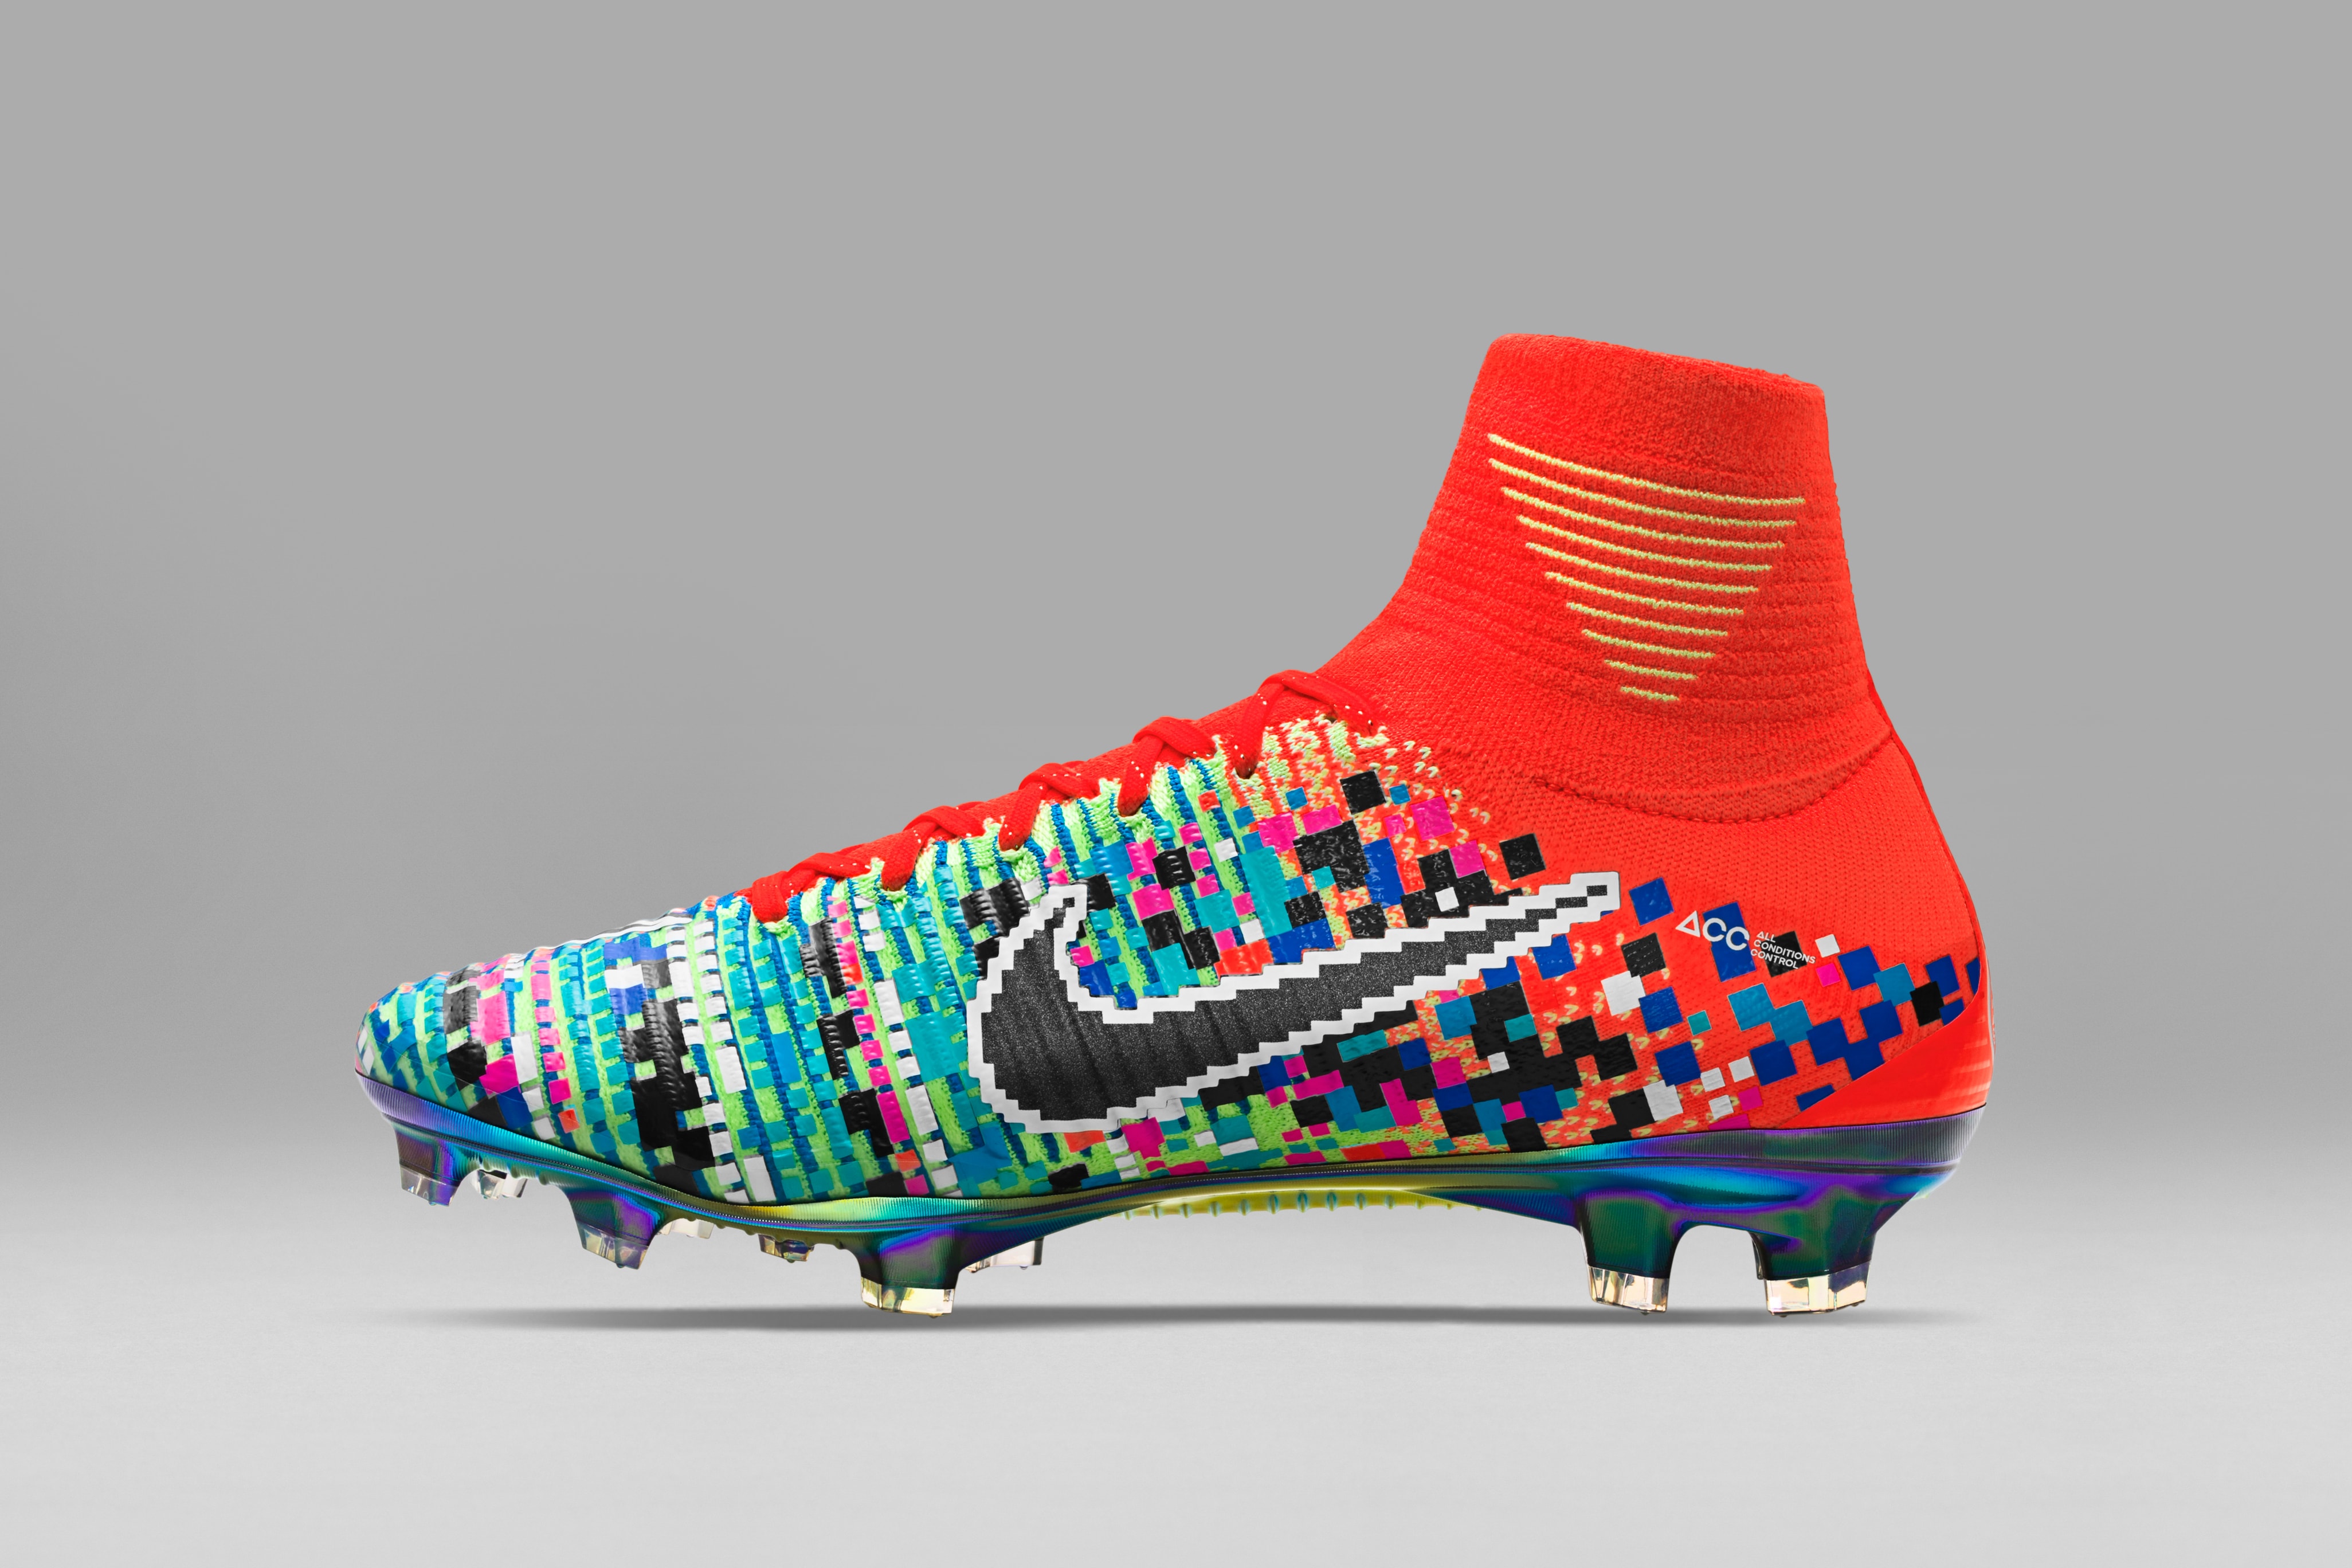 Nike's Mercurial Superfly x EA Sports Football Cleats are a